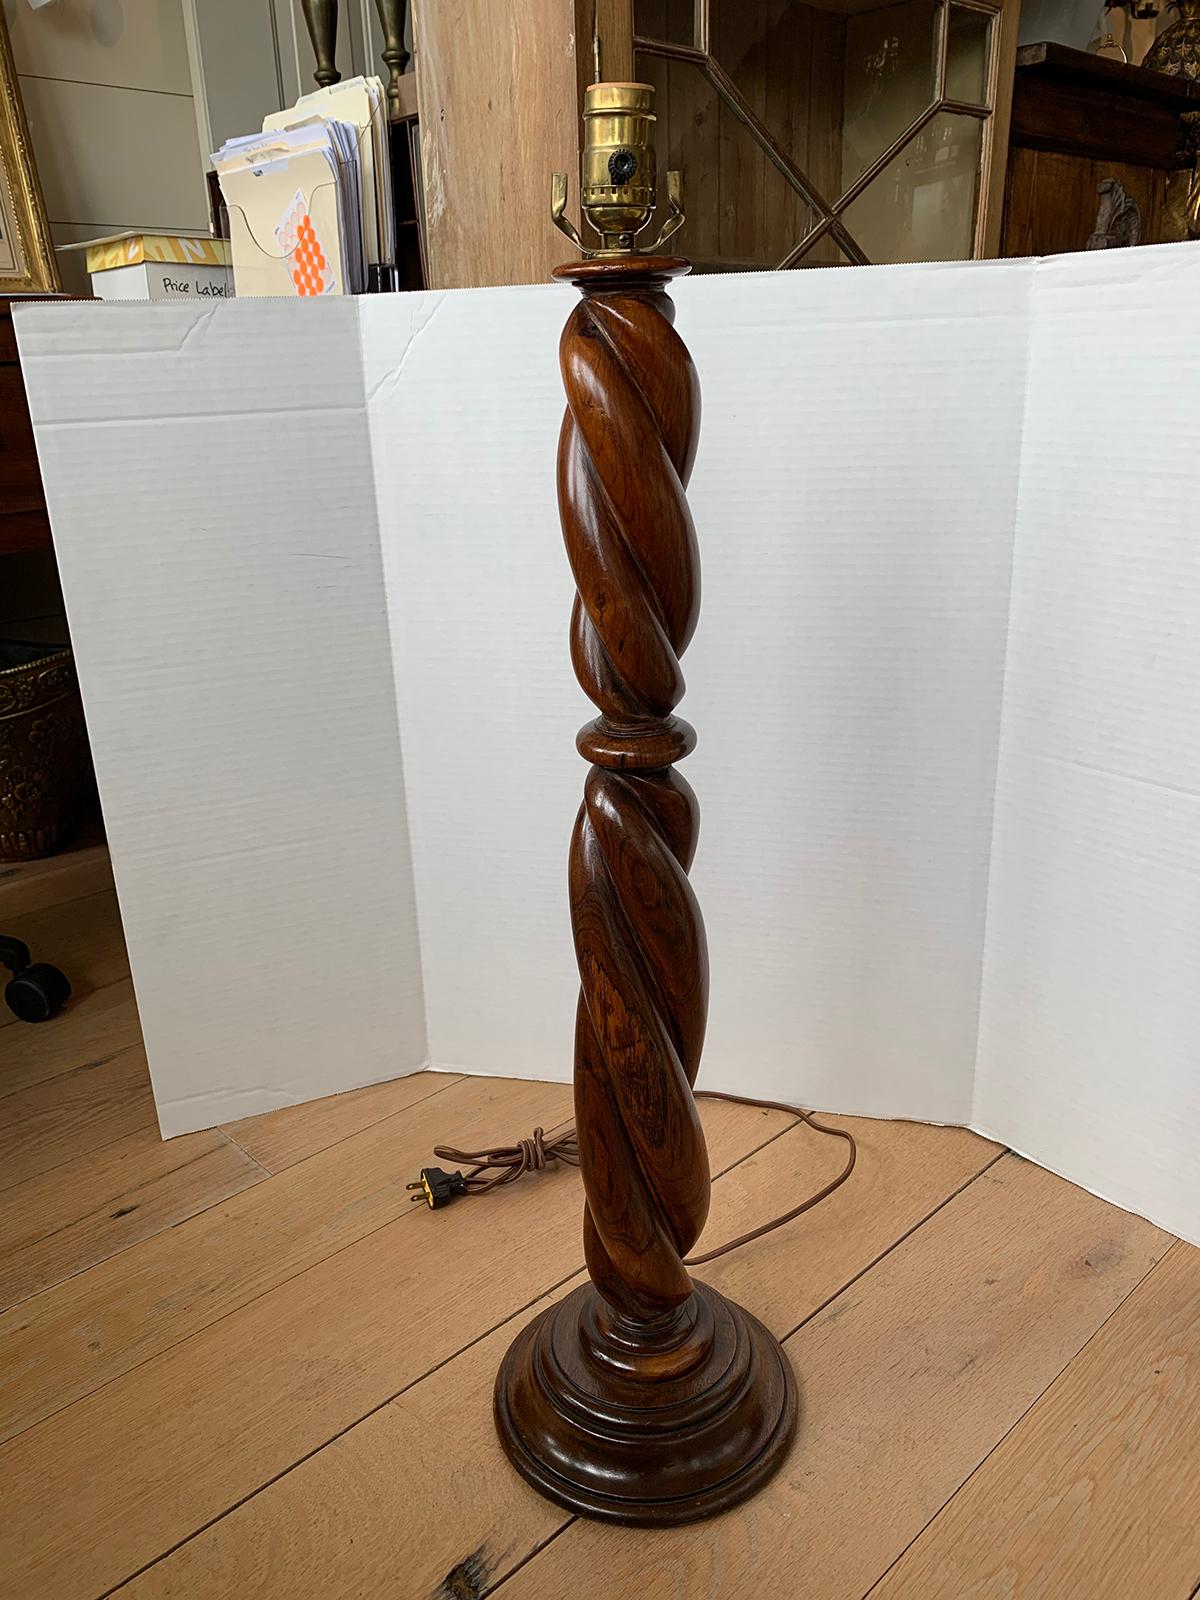 19th-20th century English tall wooden twist lamp
New wiring.